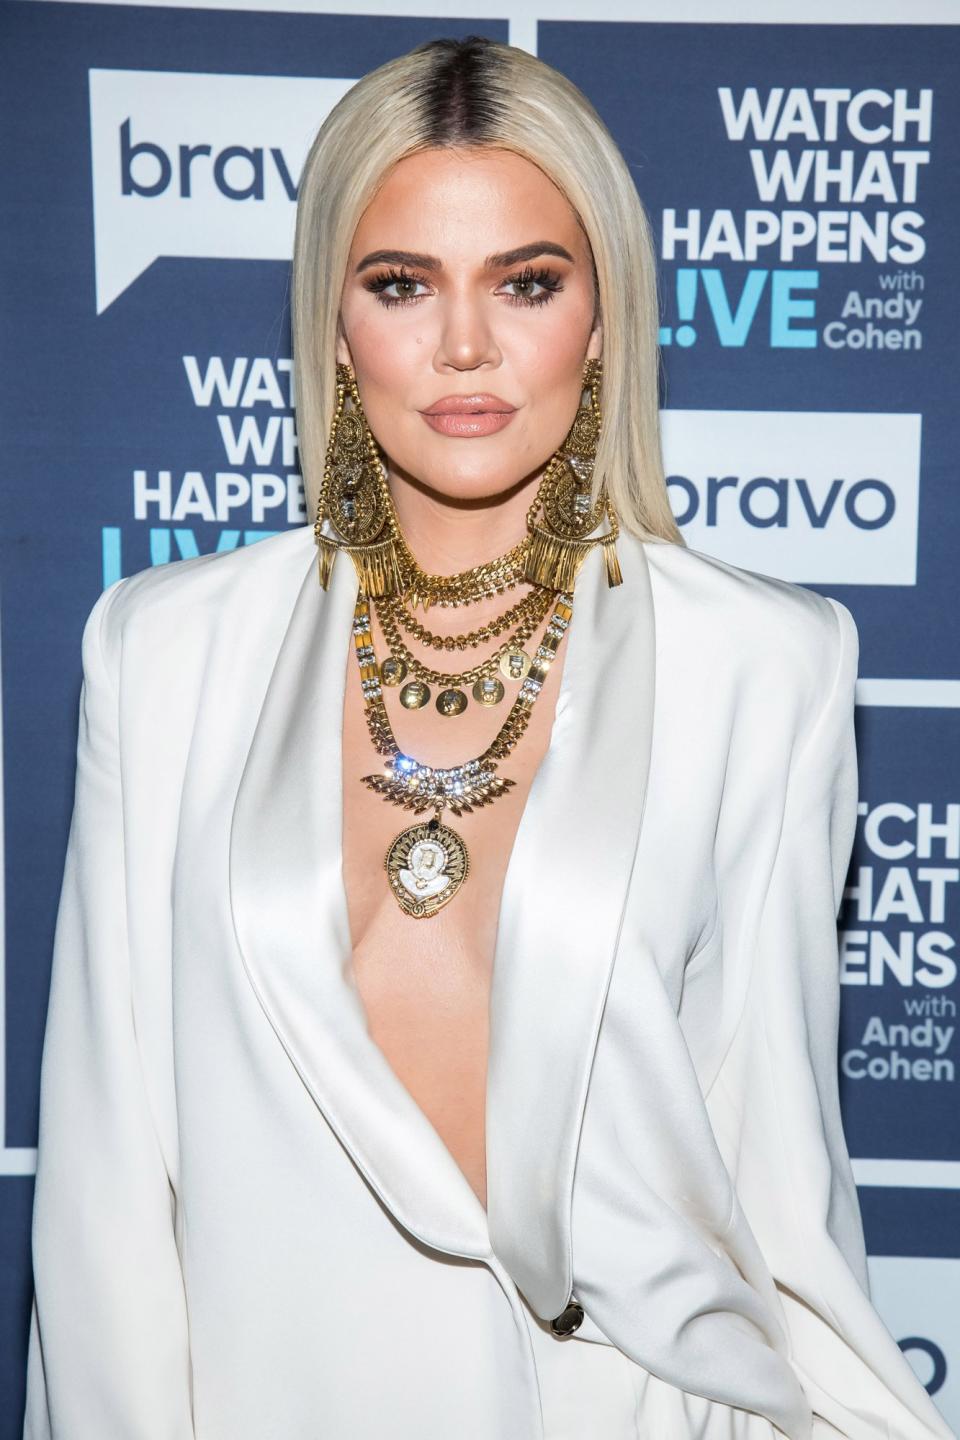 Khloé Kardashian Says That She Loves Giving to Charity (But Not Talking About It) 